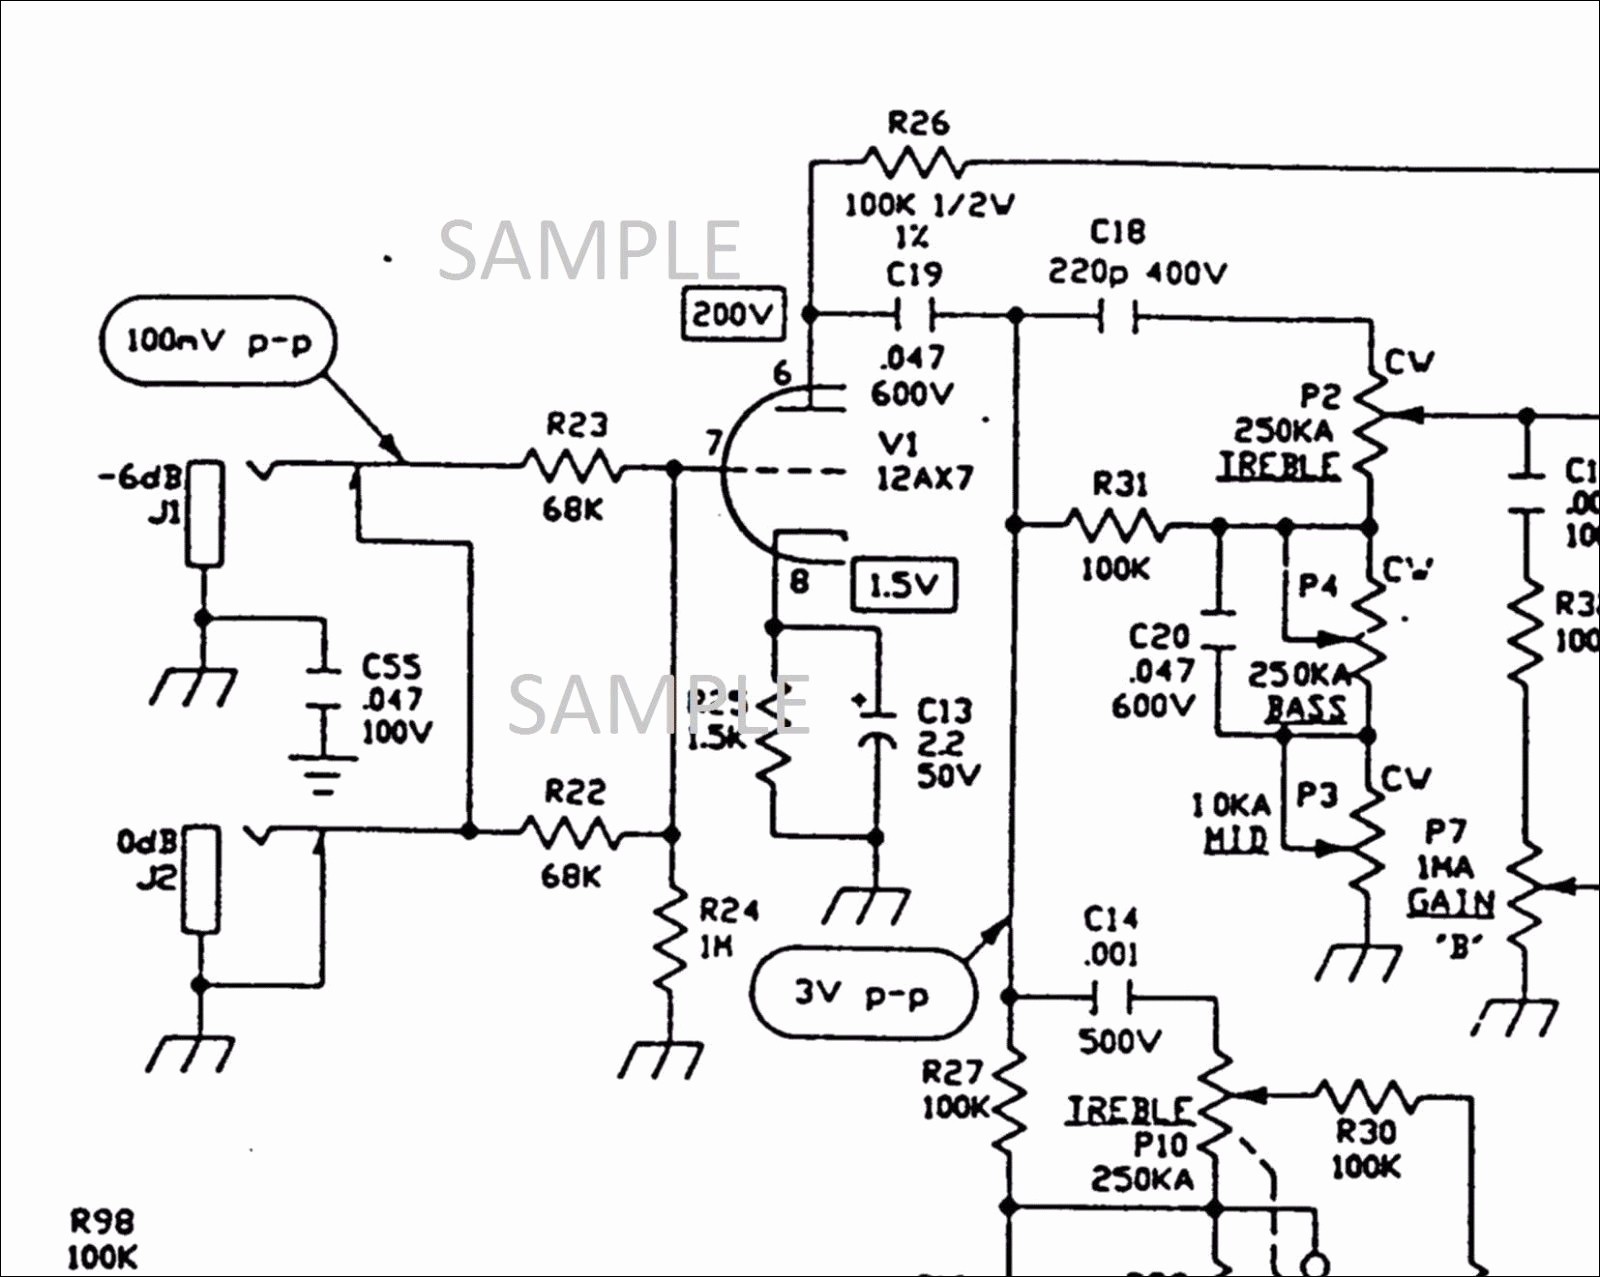 Wiring Diagram for Guitar Amp New Wiring Diagram Farmall H Wiring Diagram Awesome Gm Vss Wiring